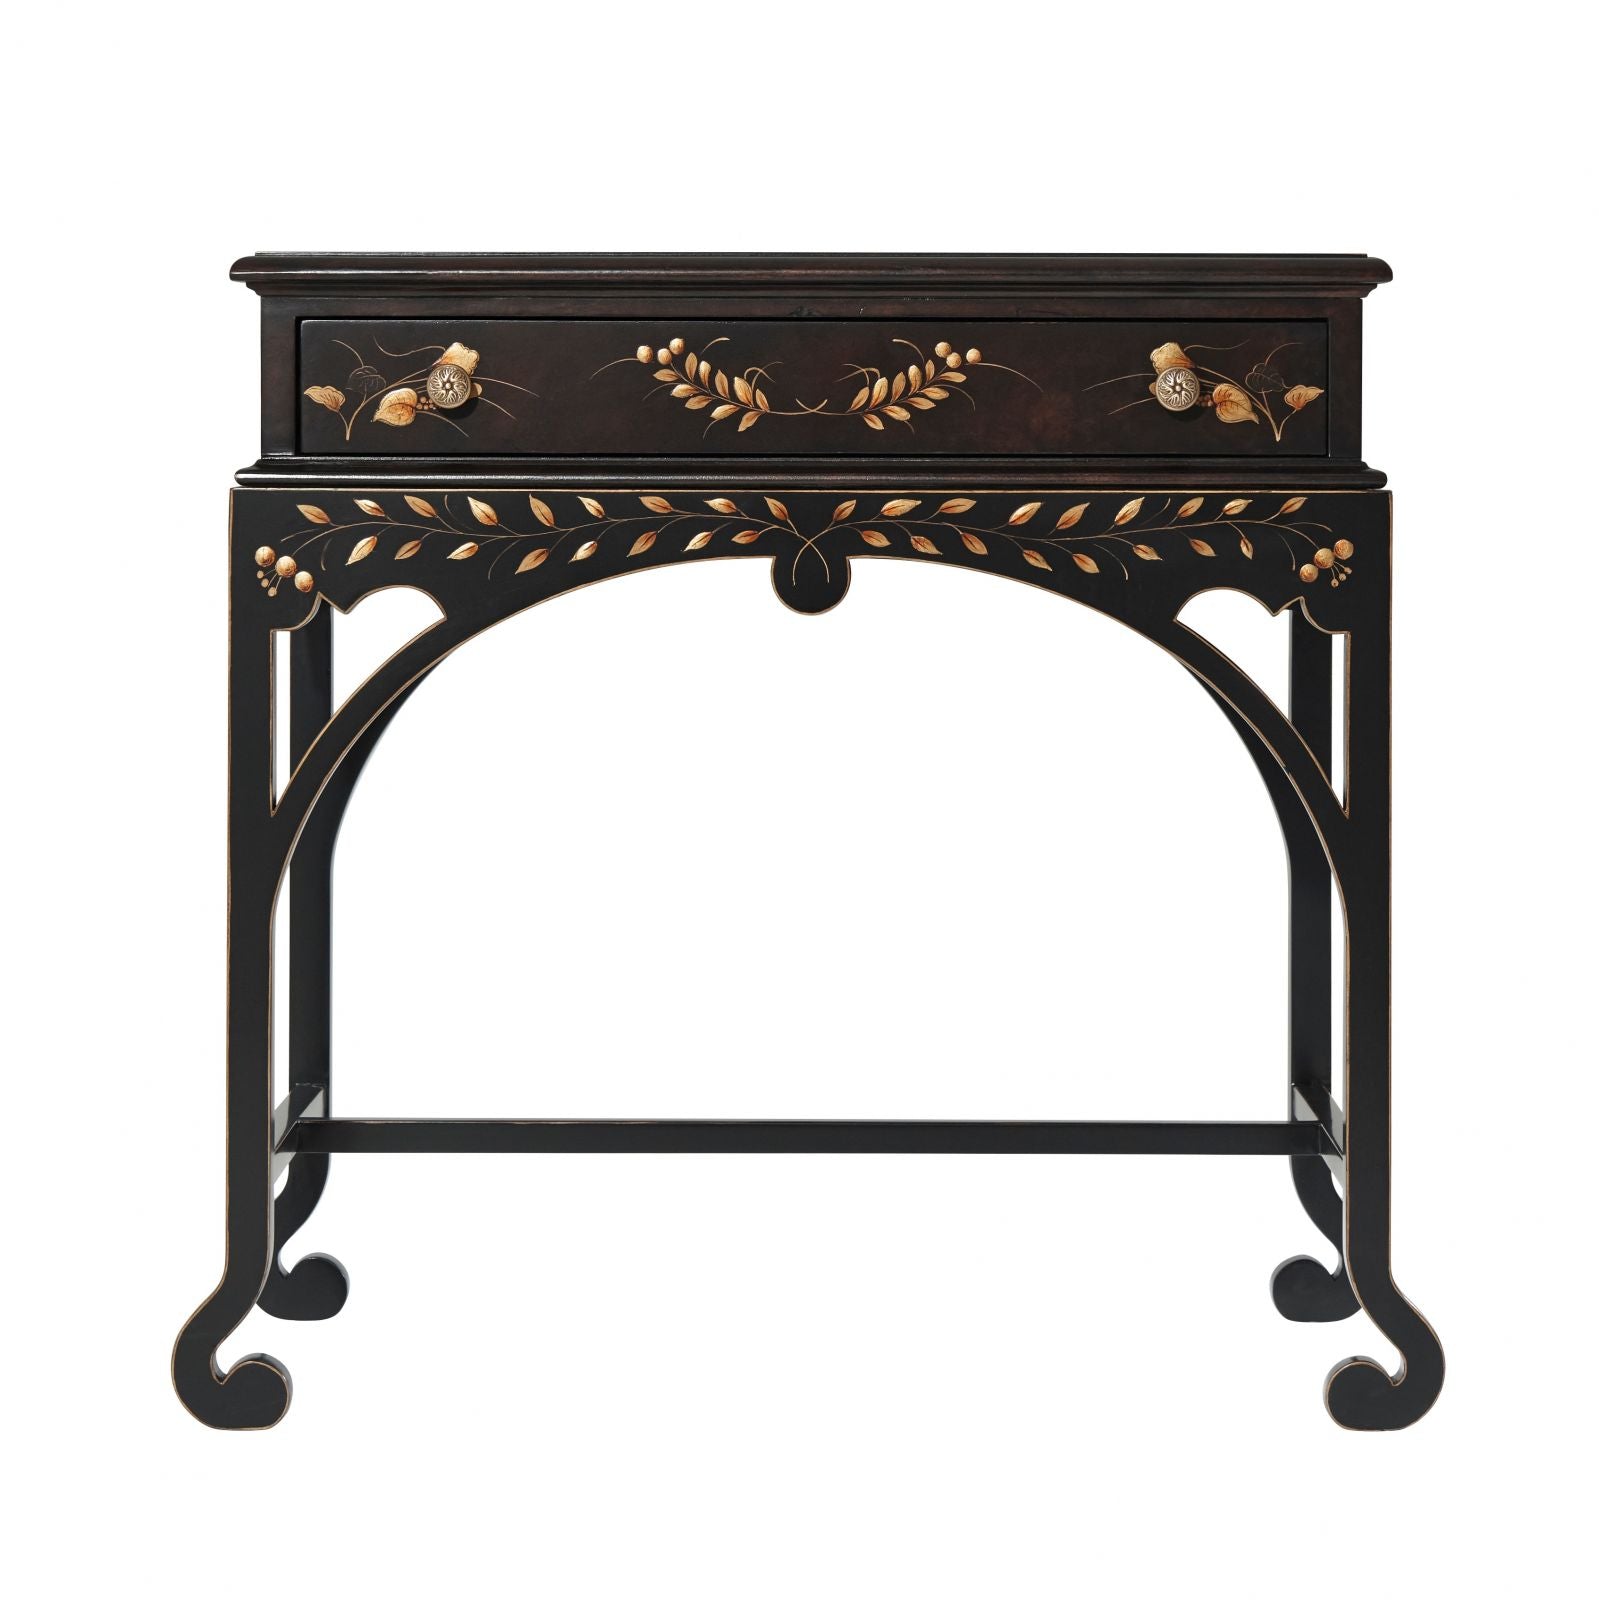 William and Mary 18th-century style side table